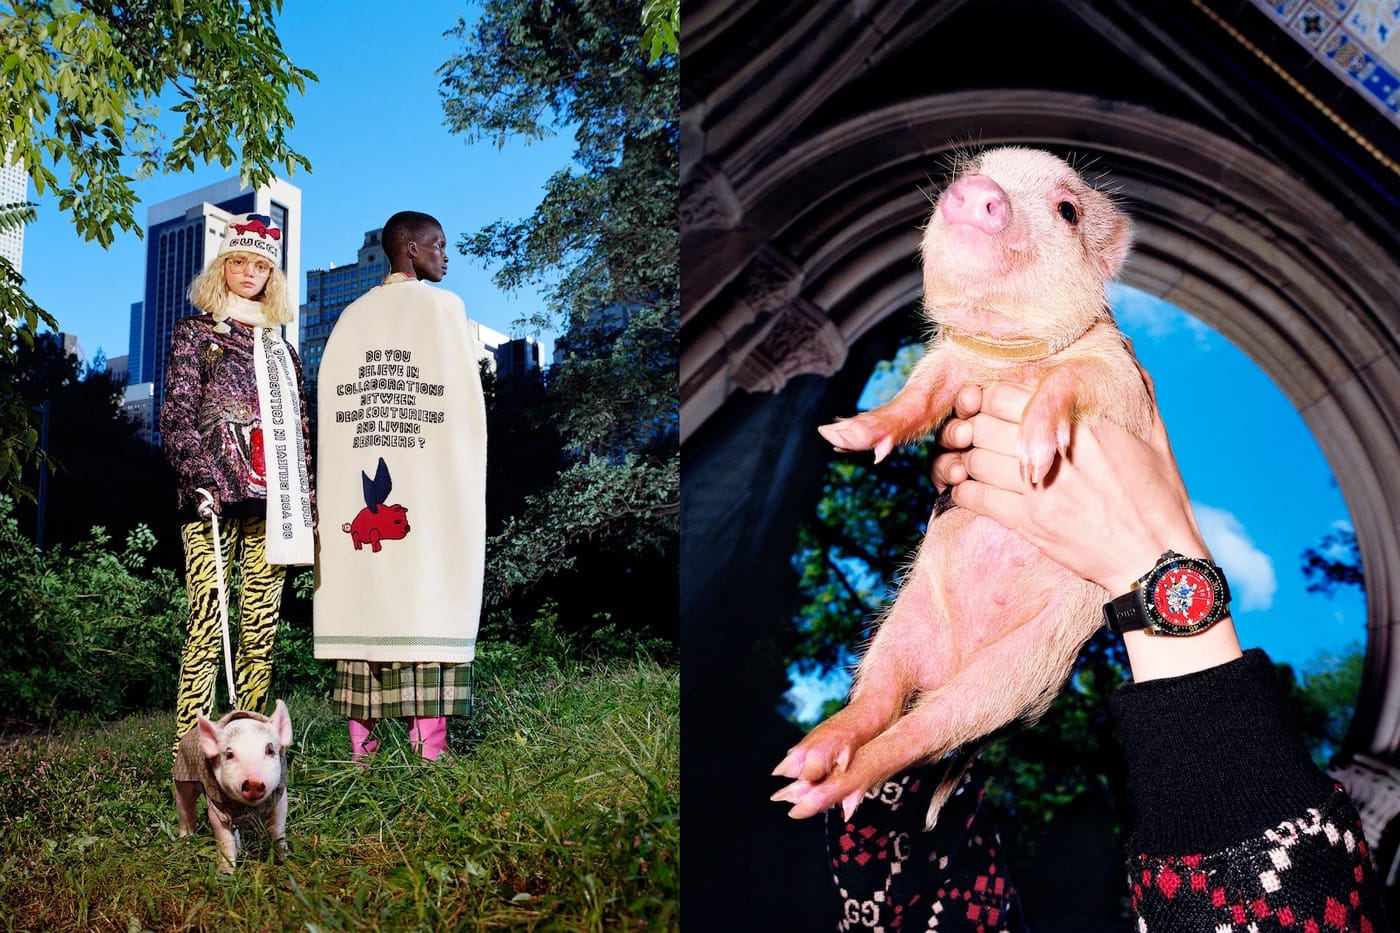 gucci year of the pig backpack